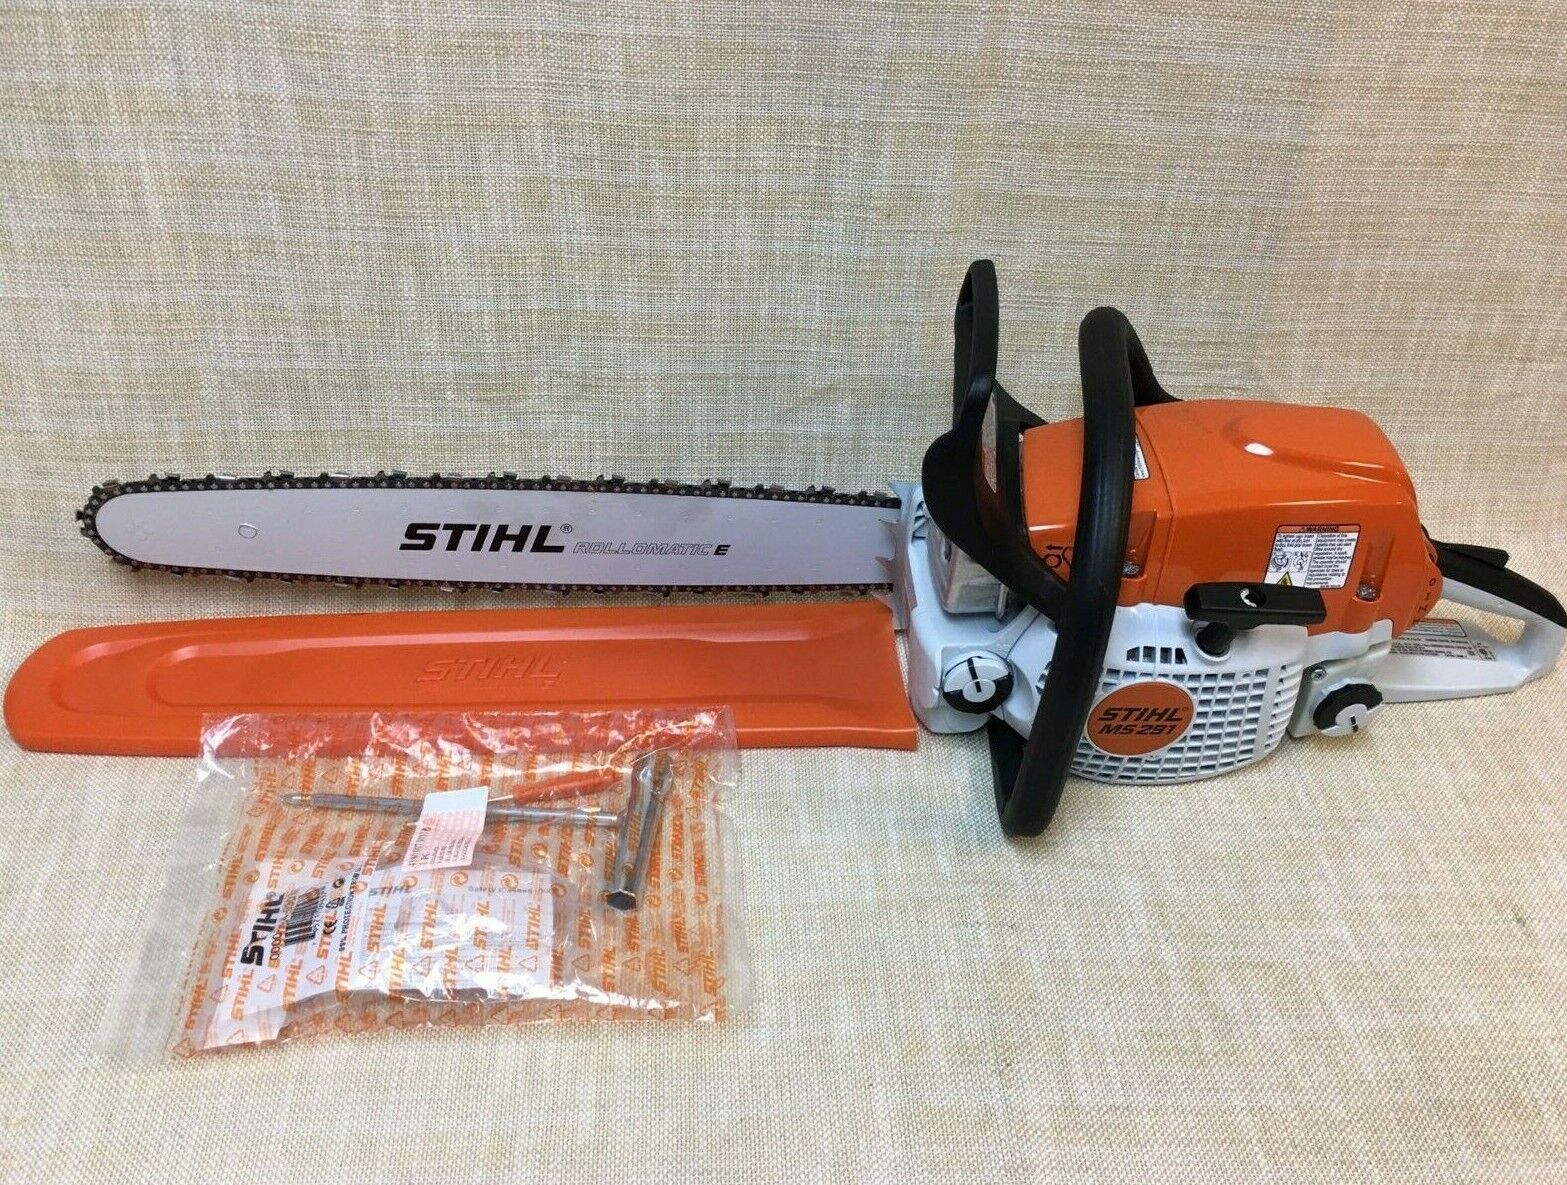 Why Did Stihl Discontinue the Ms291 